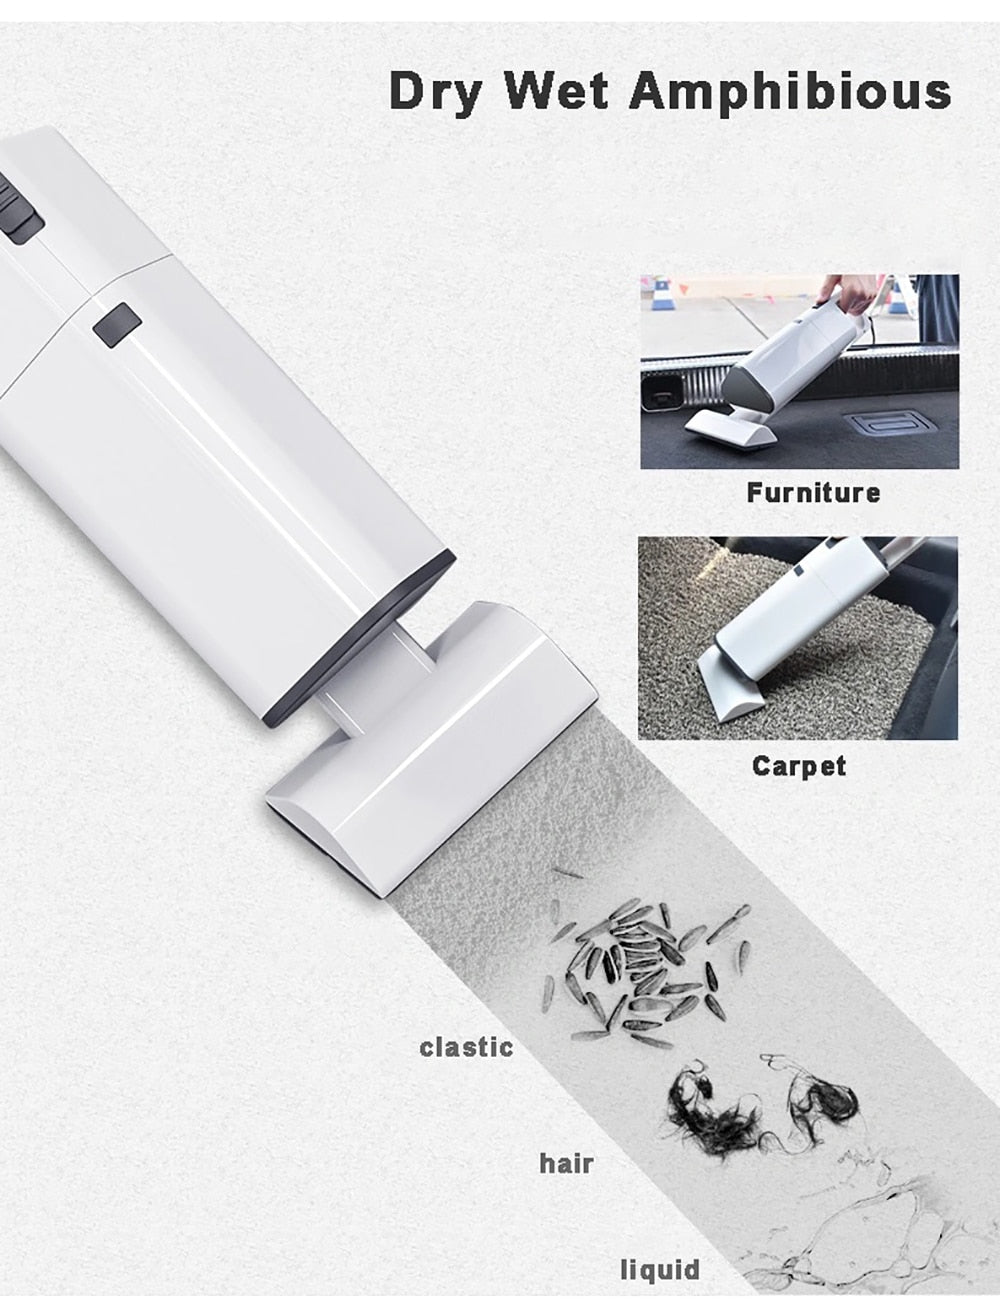 Portable Pet Hair Wireless Vacuum Cleaner for pet